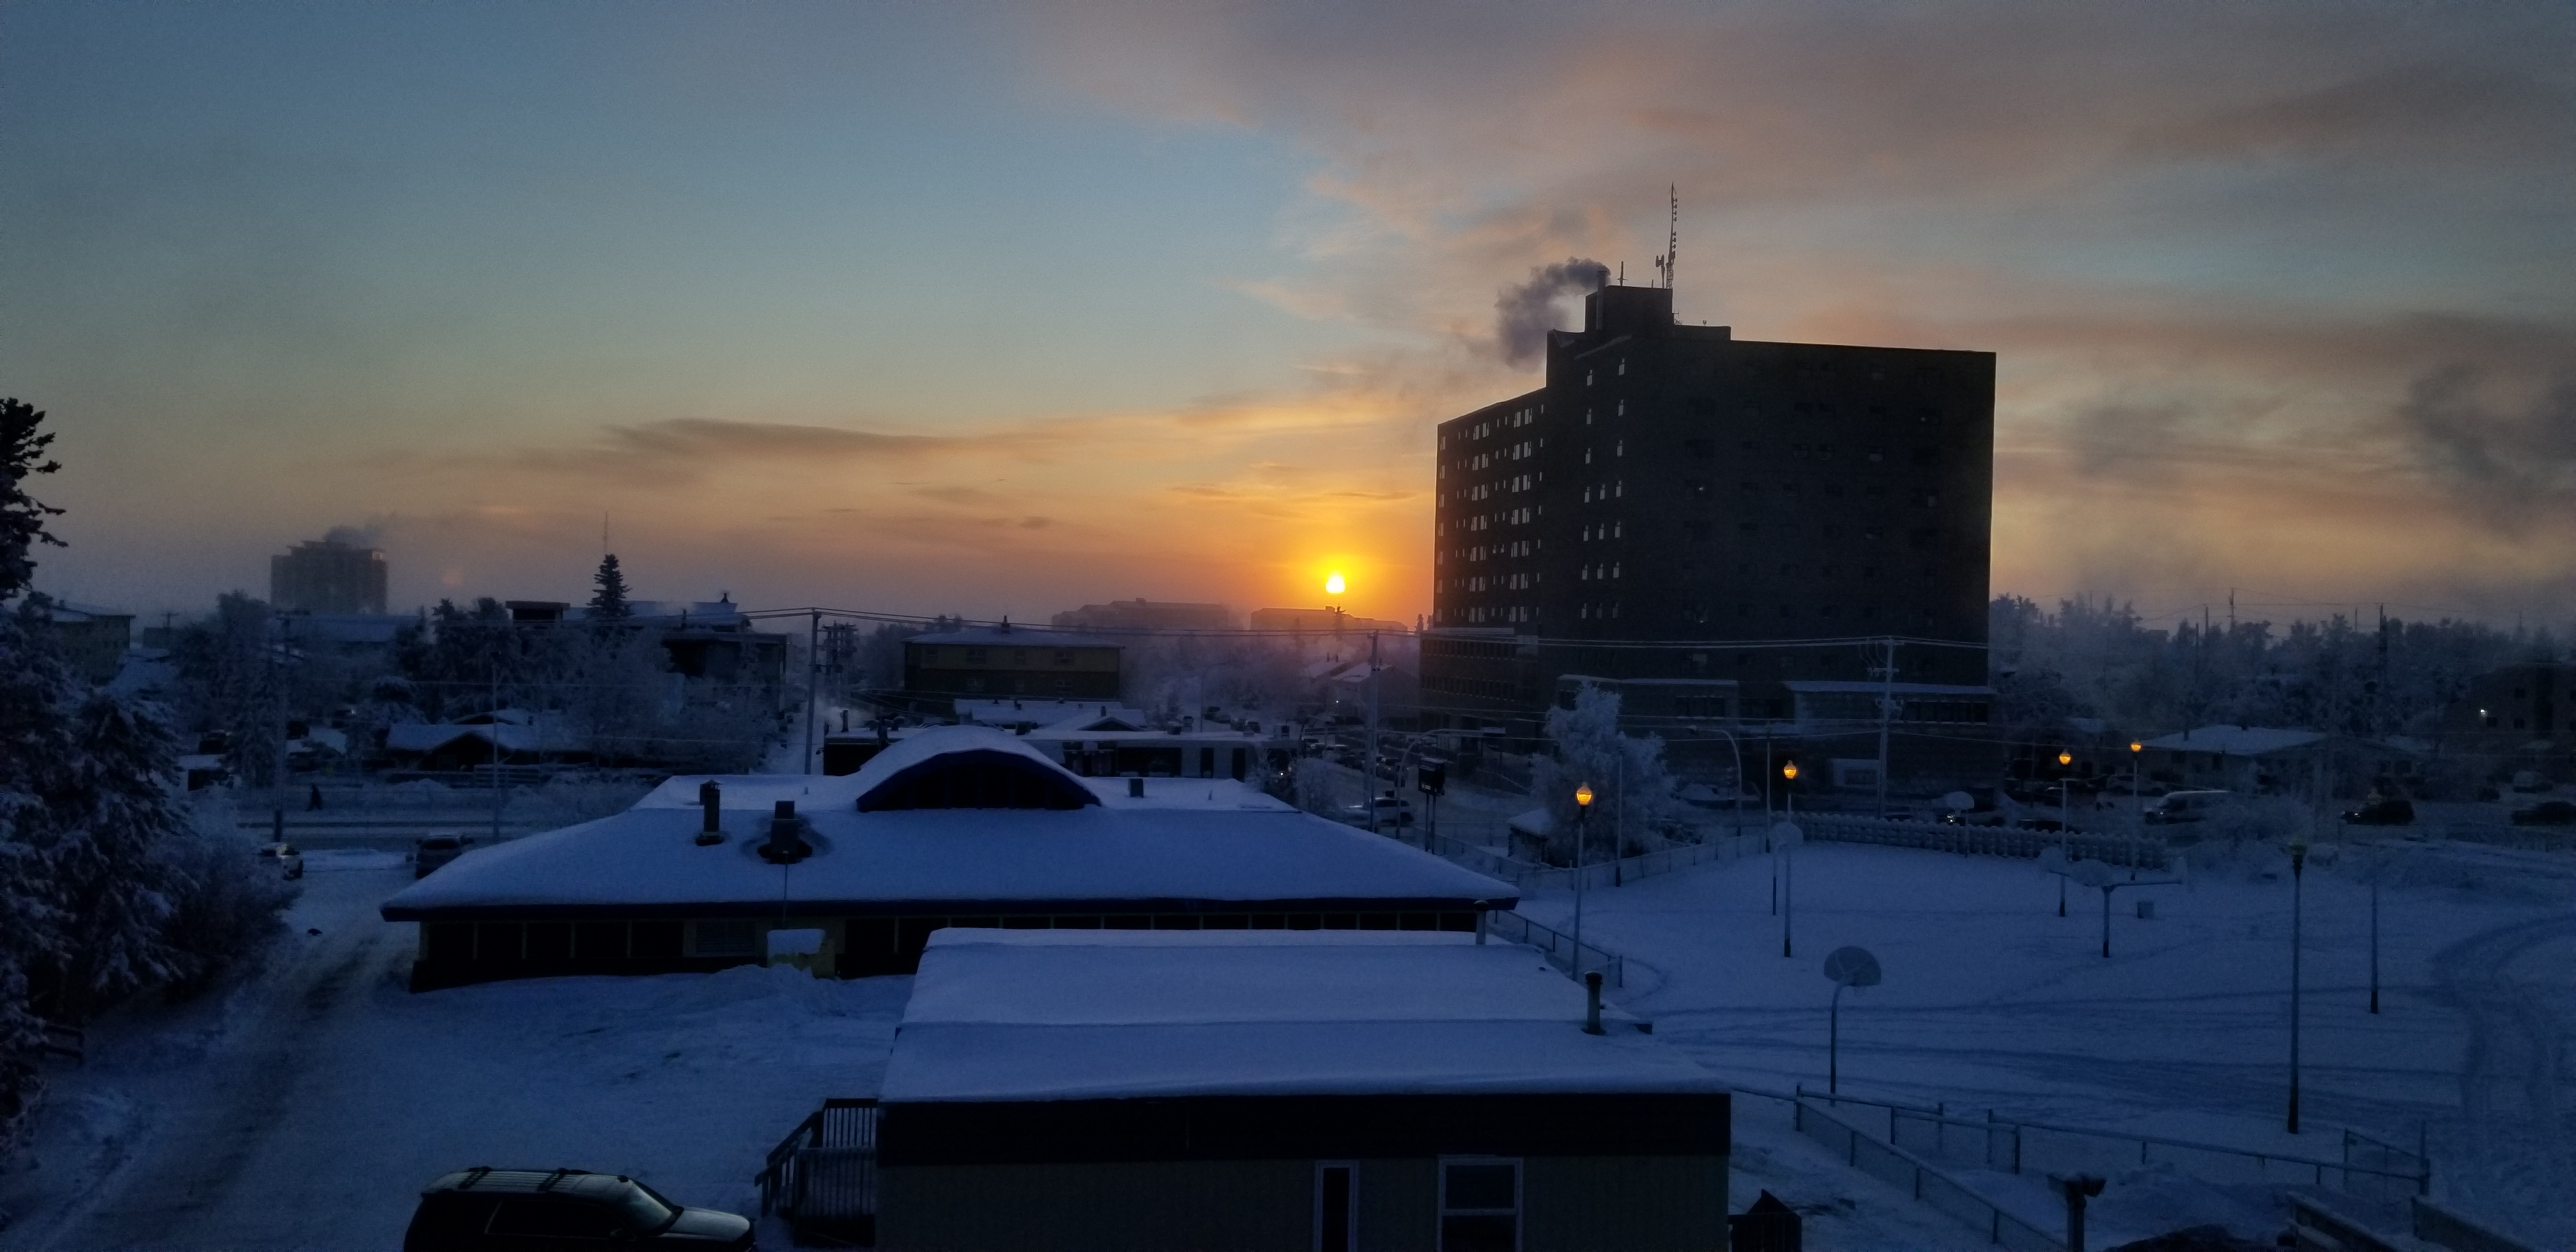 10am sunrise in Yellowknife, view from the Stantec office (December)